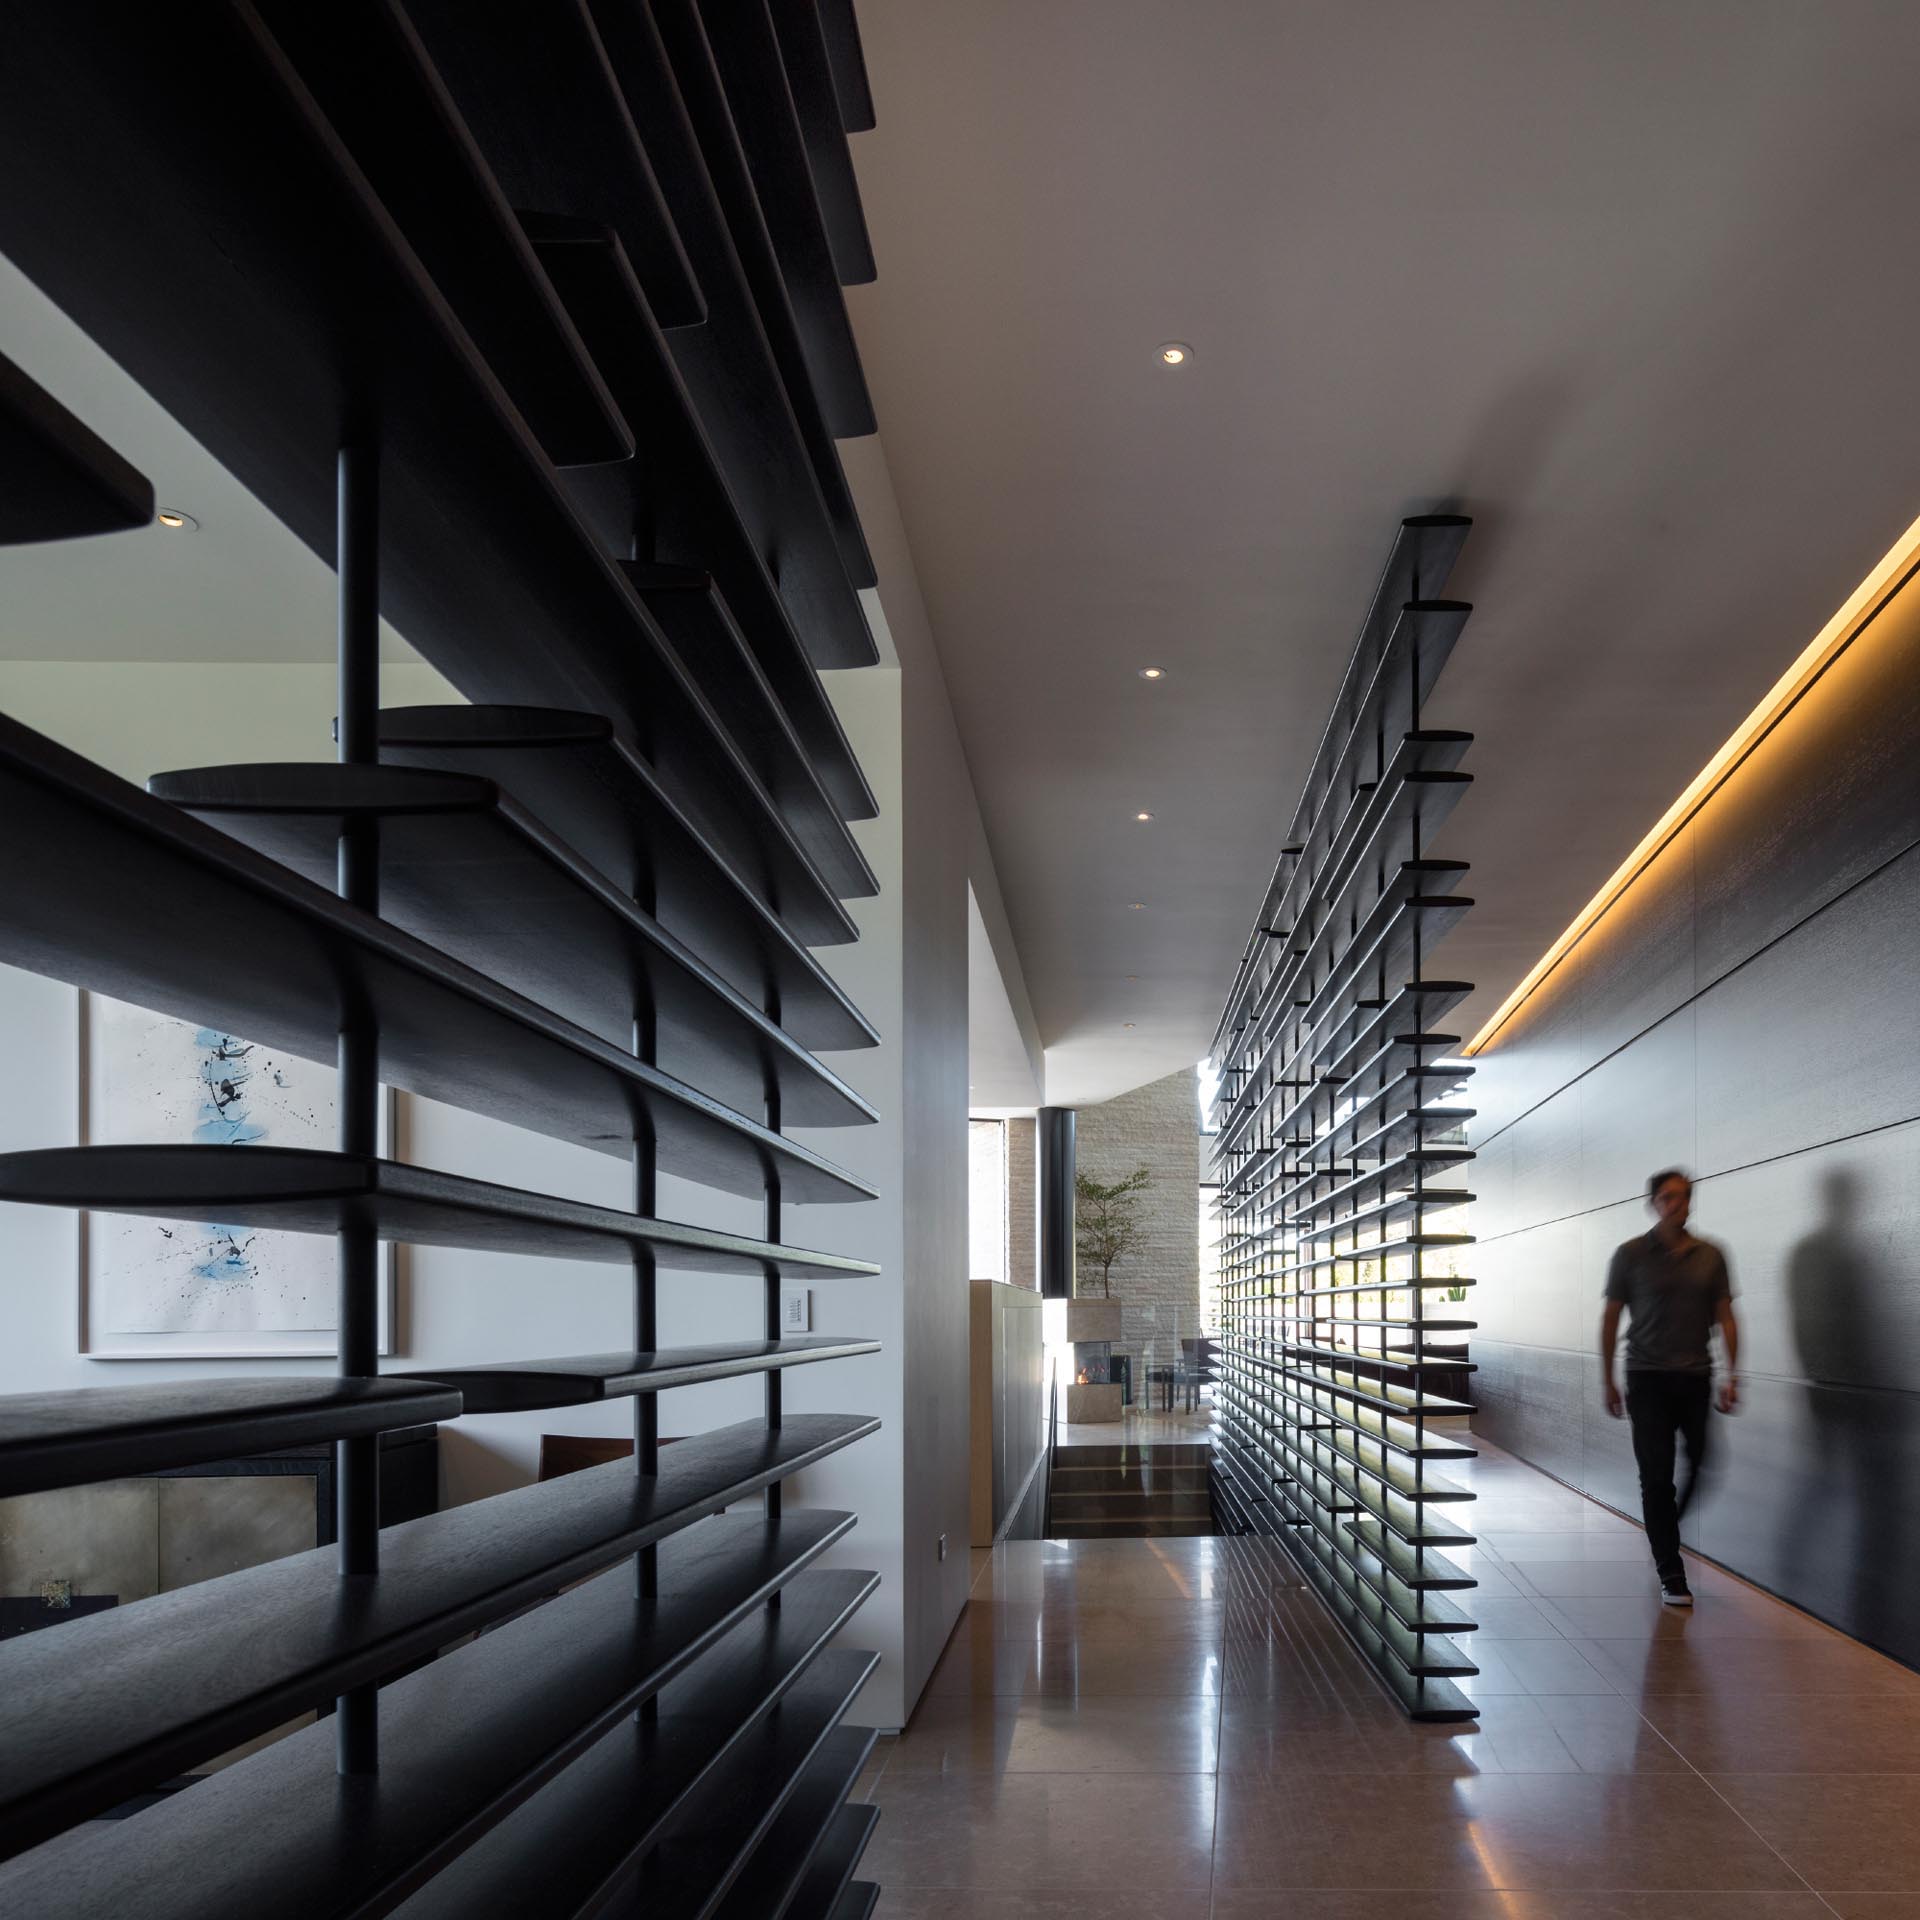 Black partitions and hidden lighting add interest to a hallway that connects the various areas of the home.